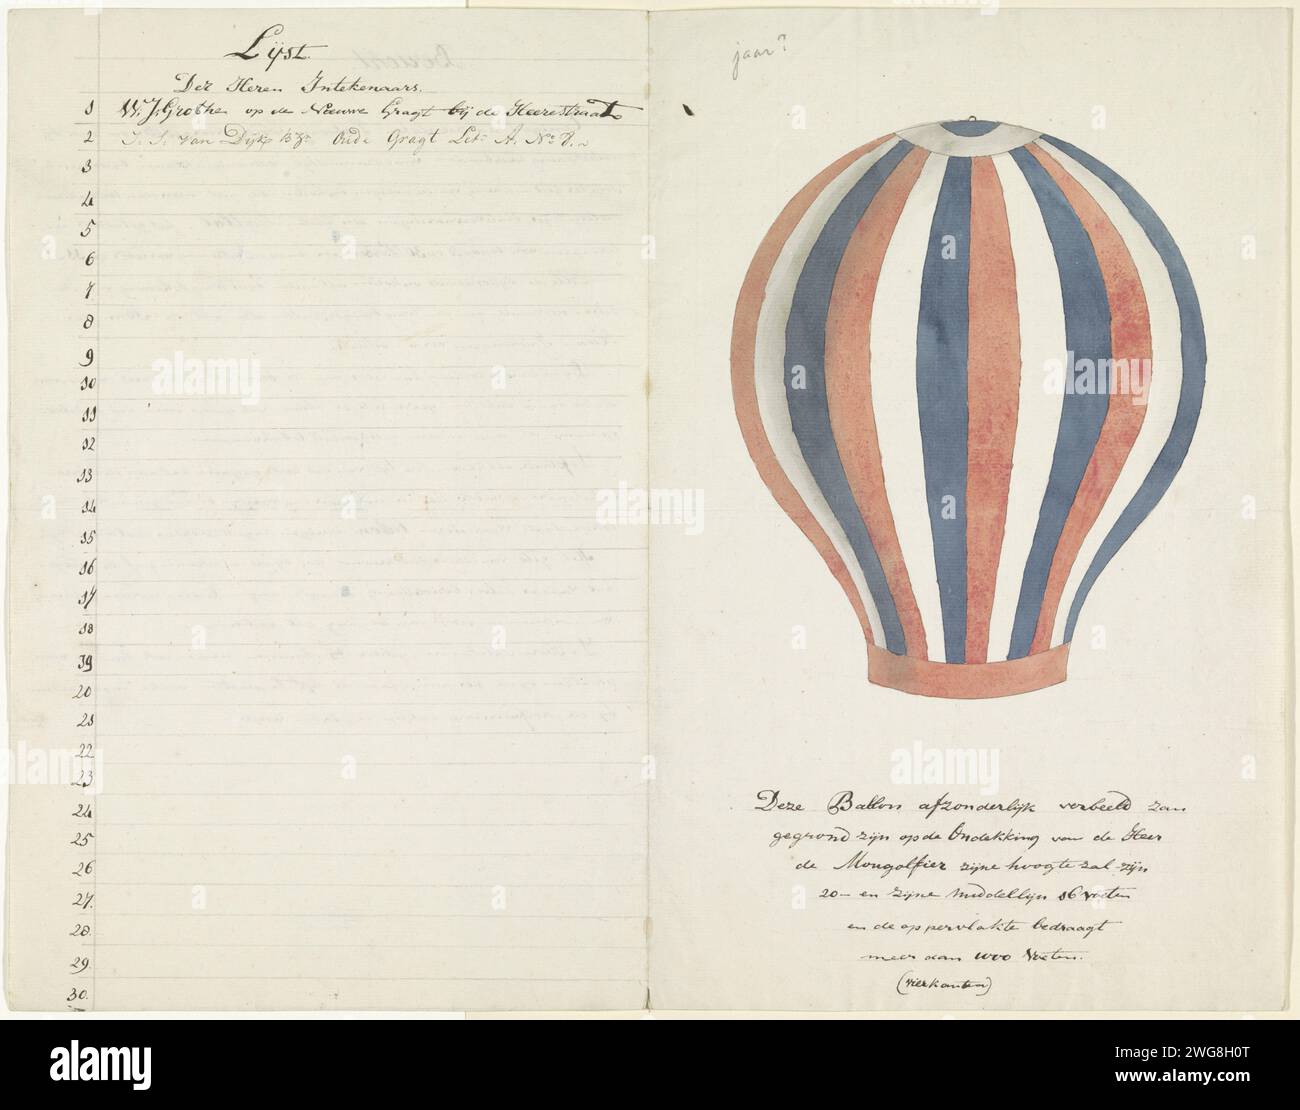 Balloon and list of subsidiaries, Anonymous, 1700 - 1800 drawing Recto an image of a hot air balloon and a list of subsidiaries. VERSO A handwritten text with explanation on the register list.  paper. watercolor (paint). ink pen / brush balloon (aviation). member, membership Stock Photo